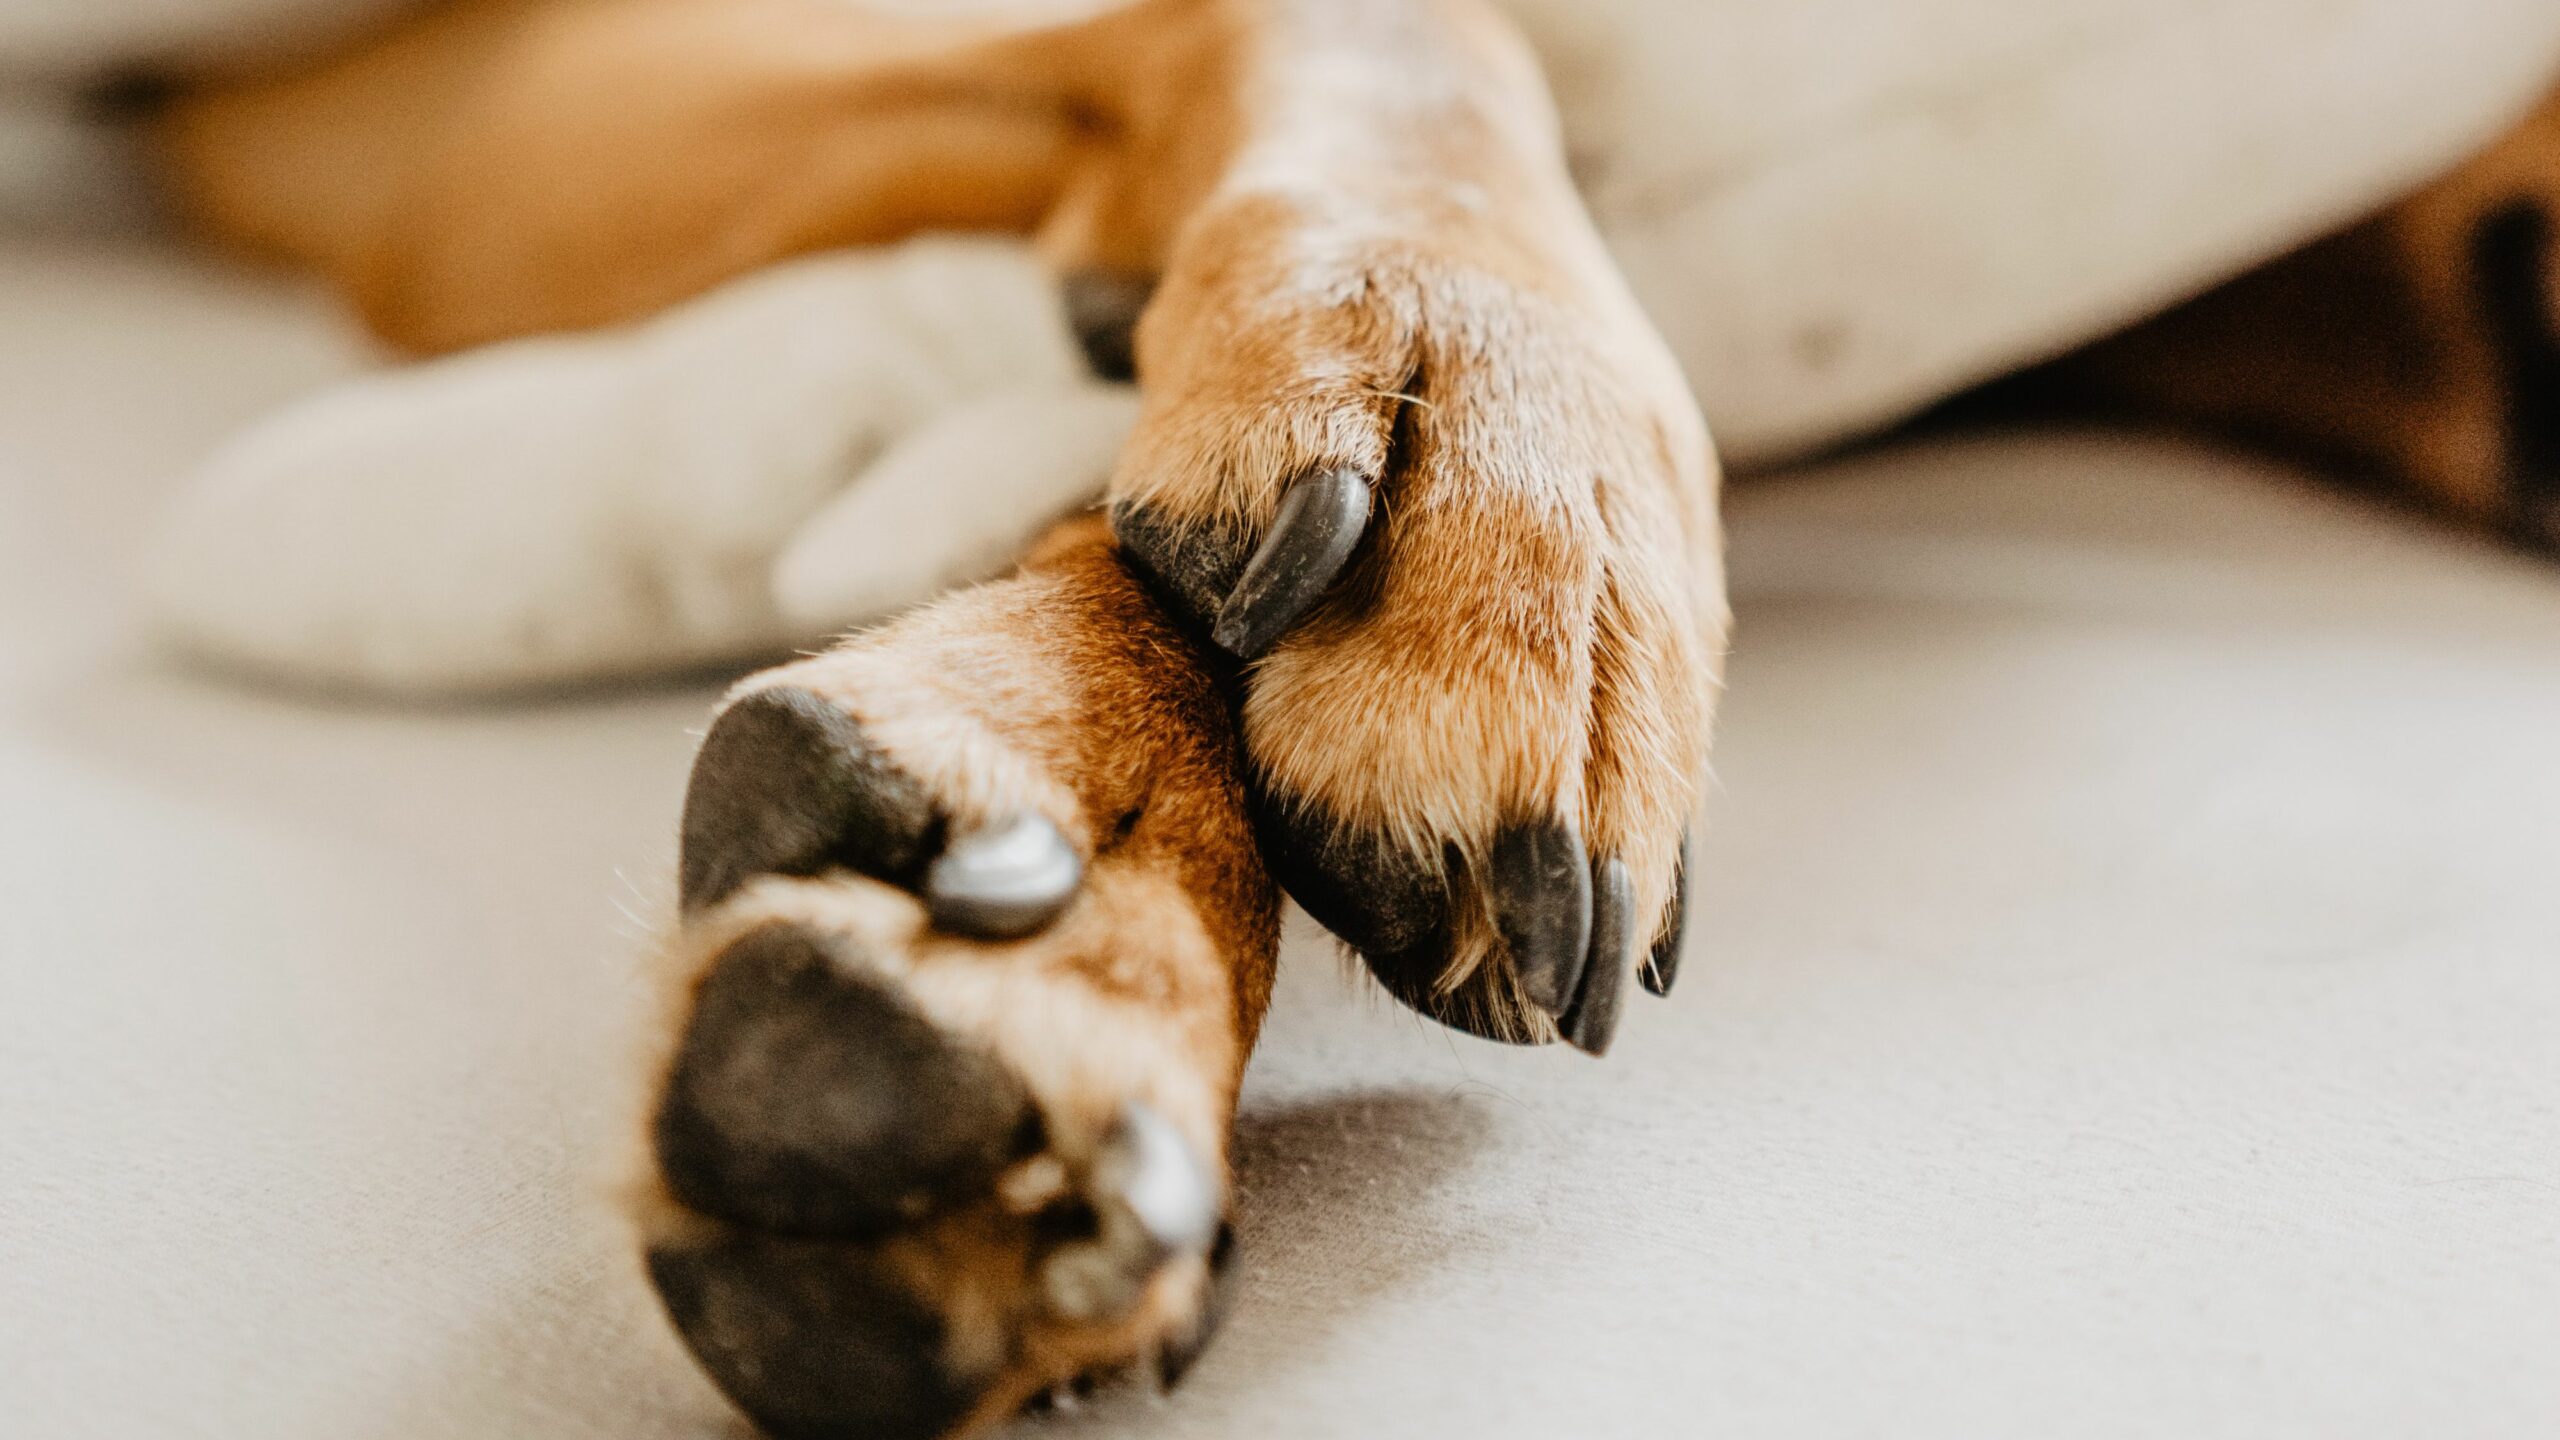 How do you know if a dog’s nail is infected?